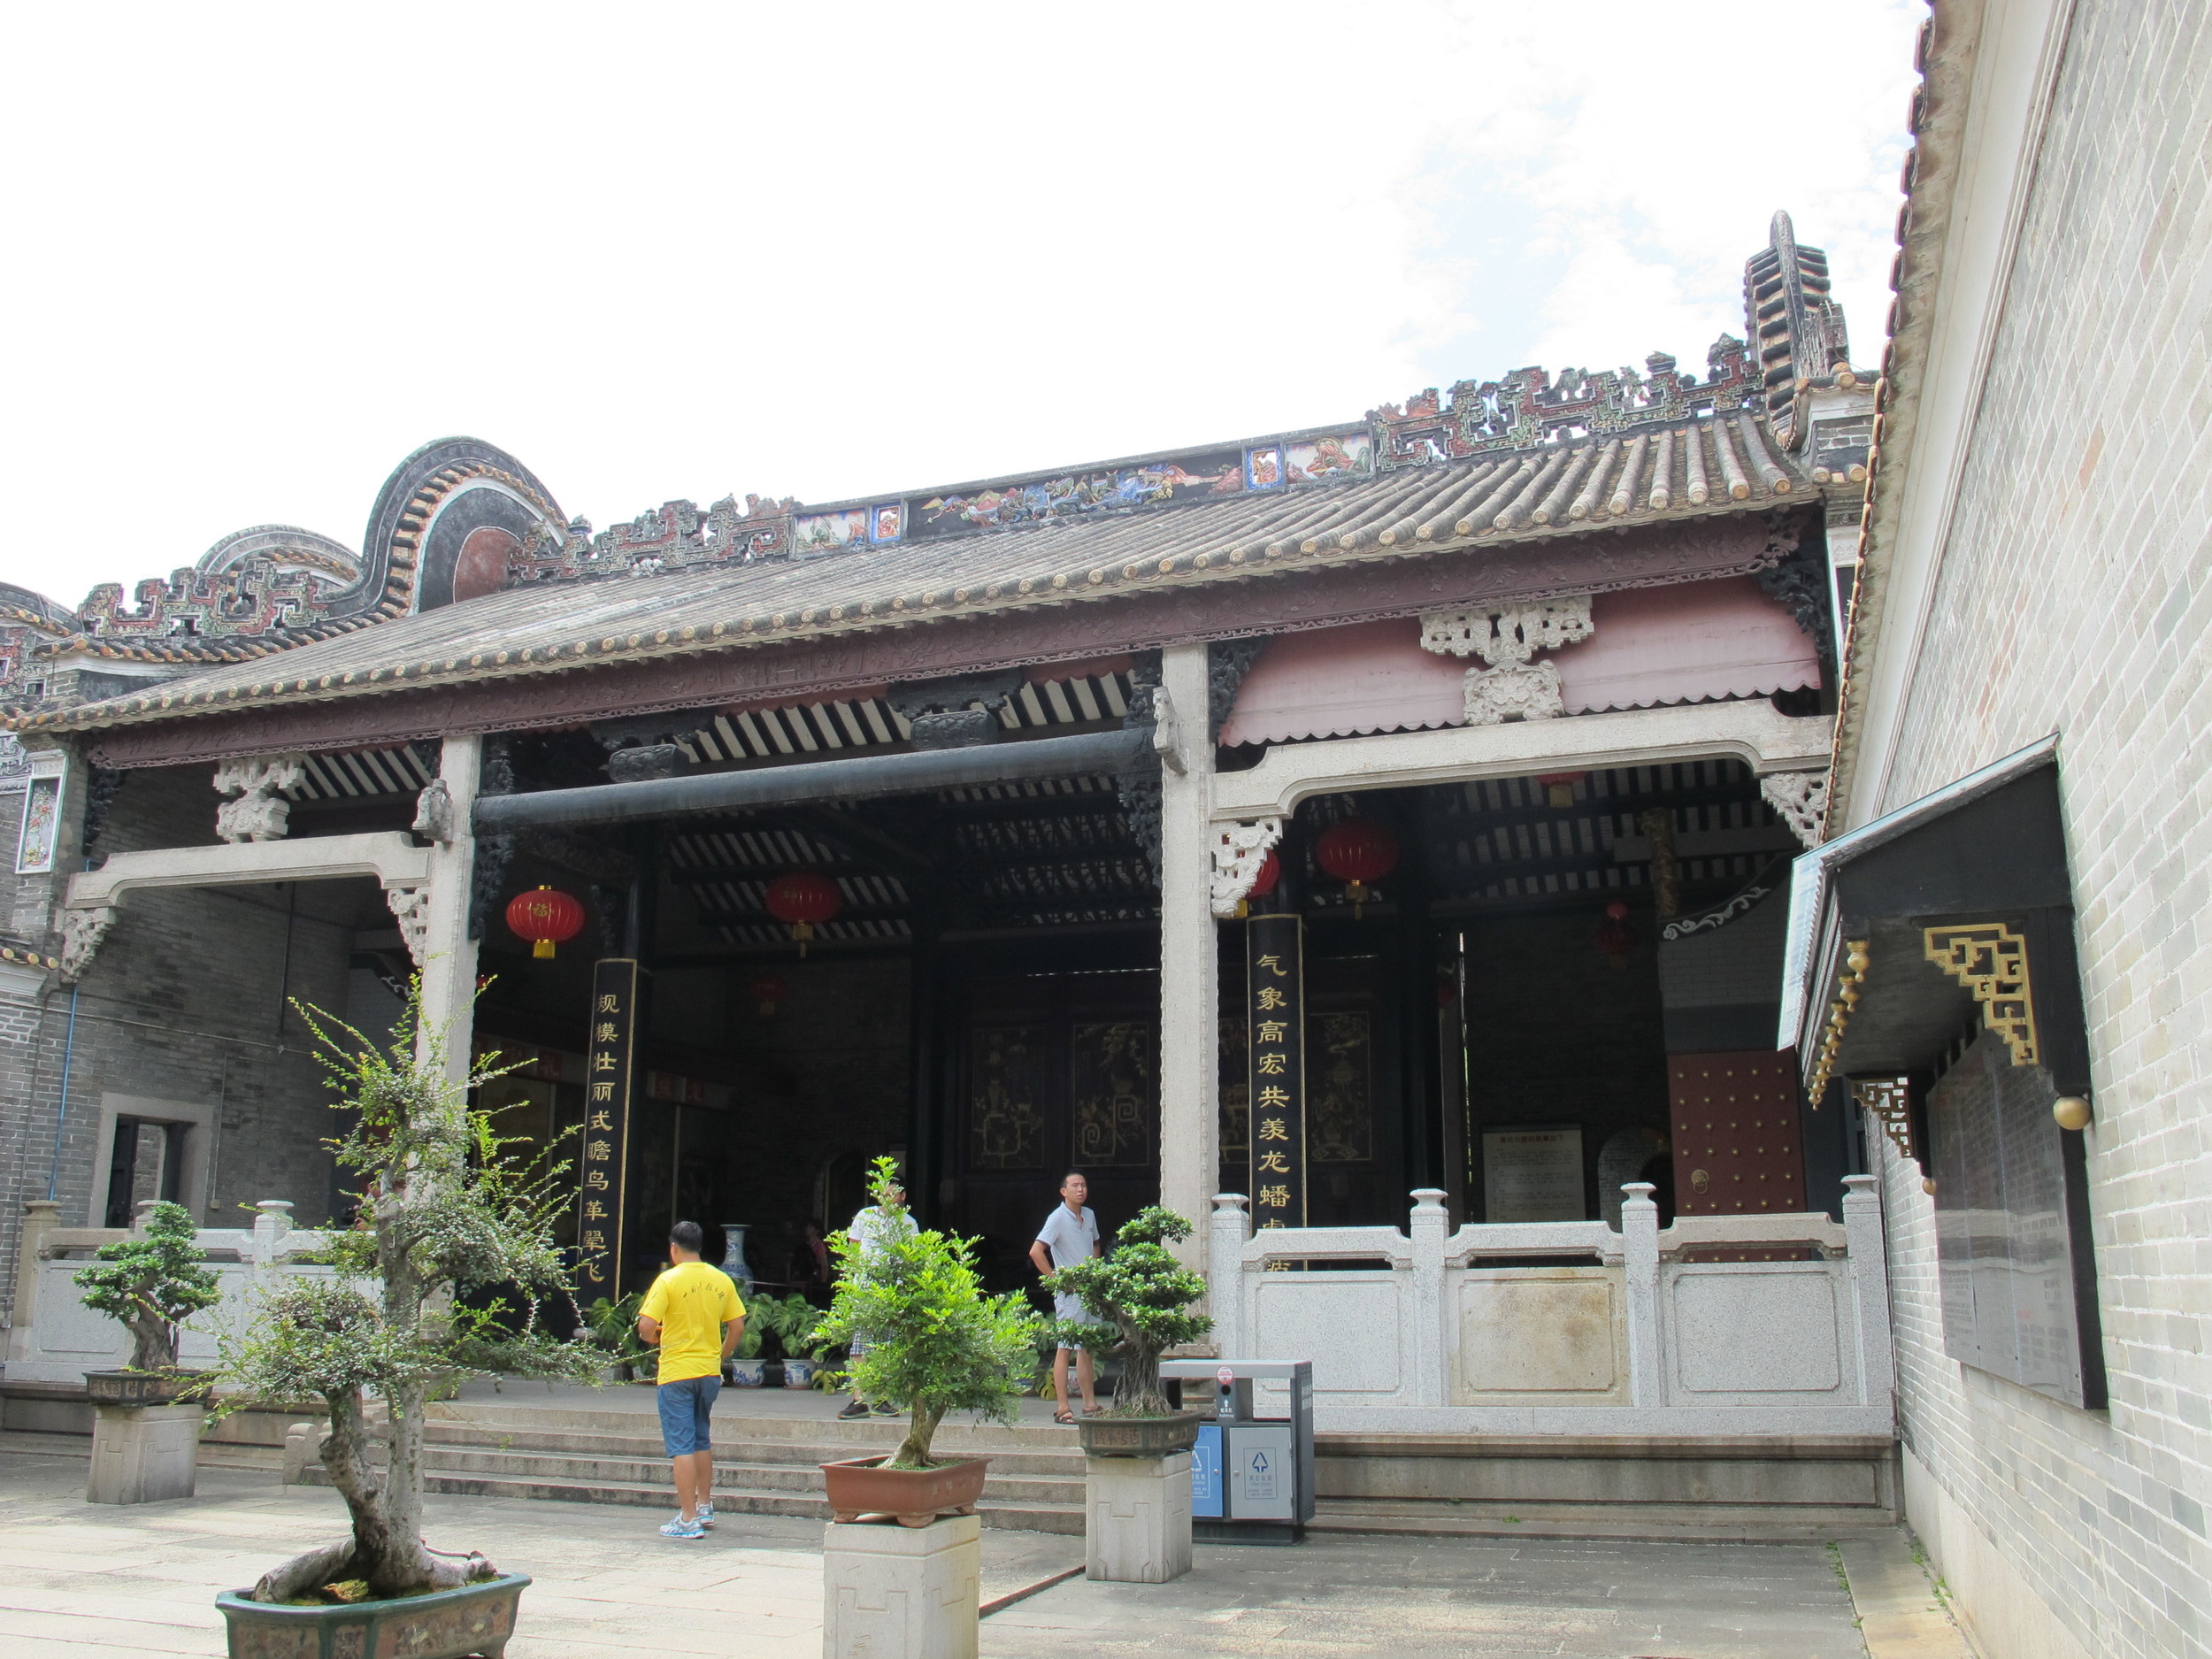 Showcasing the elaborate architecture of the roof, signifying a scholar’s house.